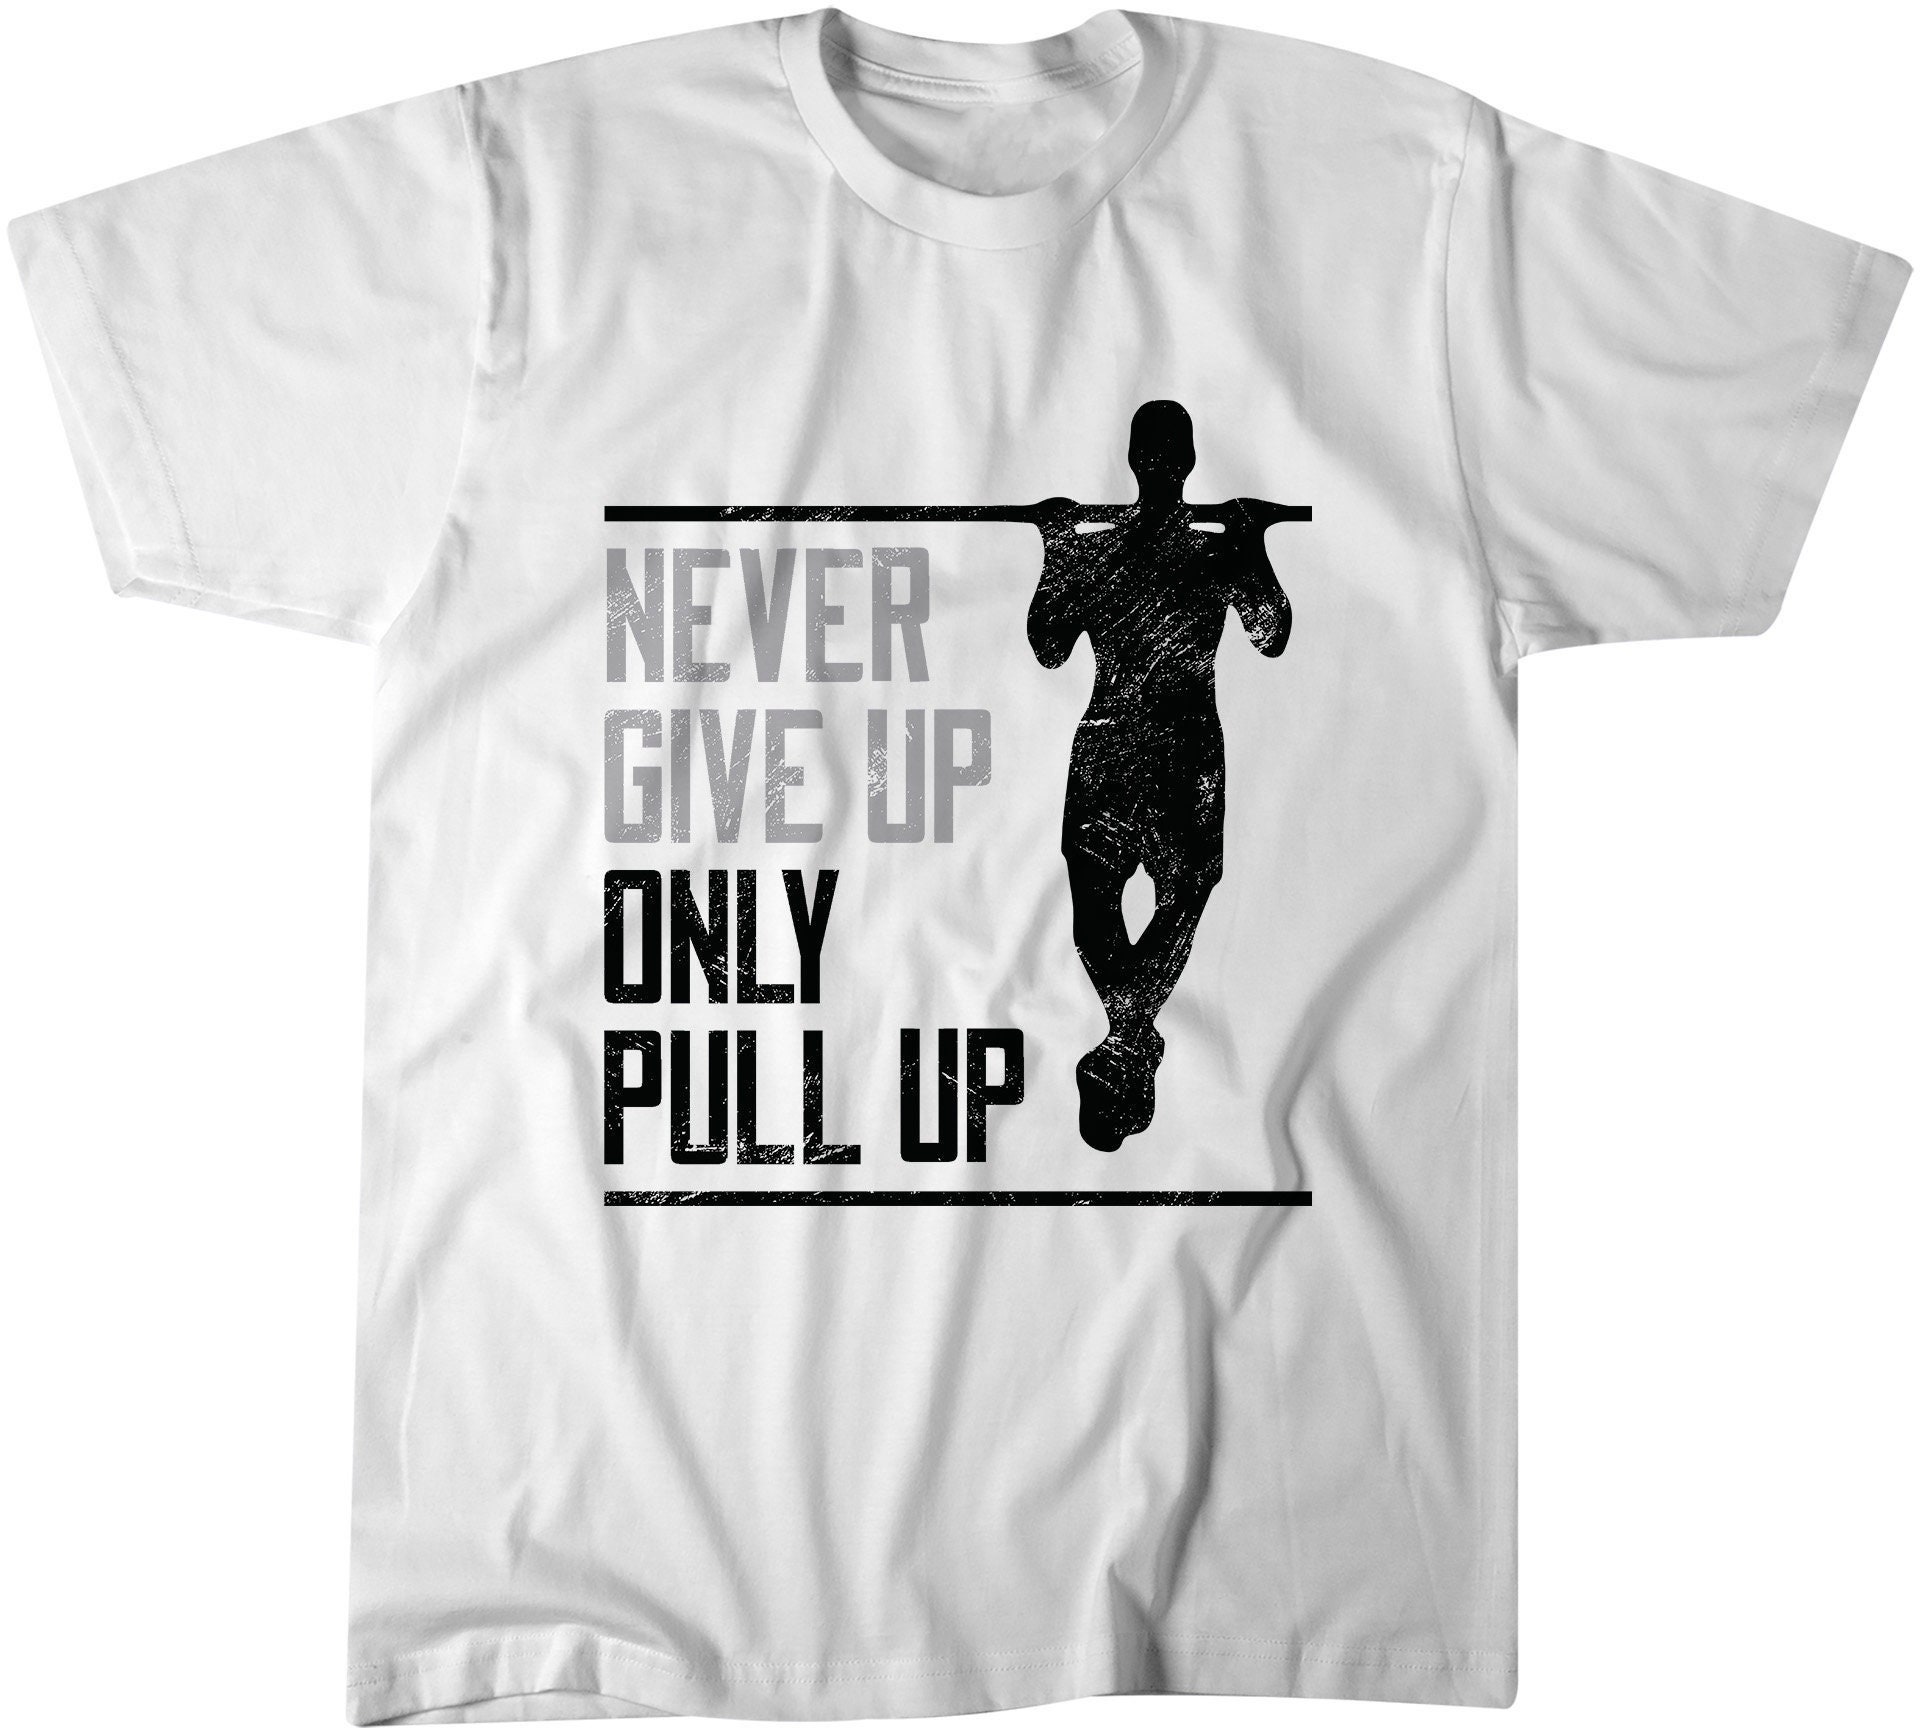 Never live up. Футболка Master of gains never give up. Невер ГИВ ап. Pull up перевод. Black Star never give up.